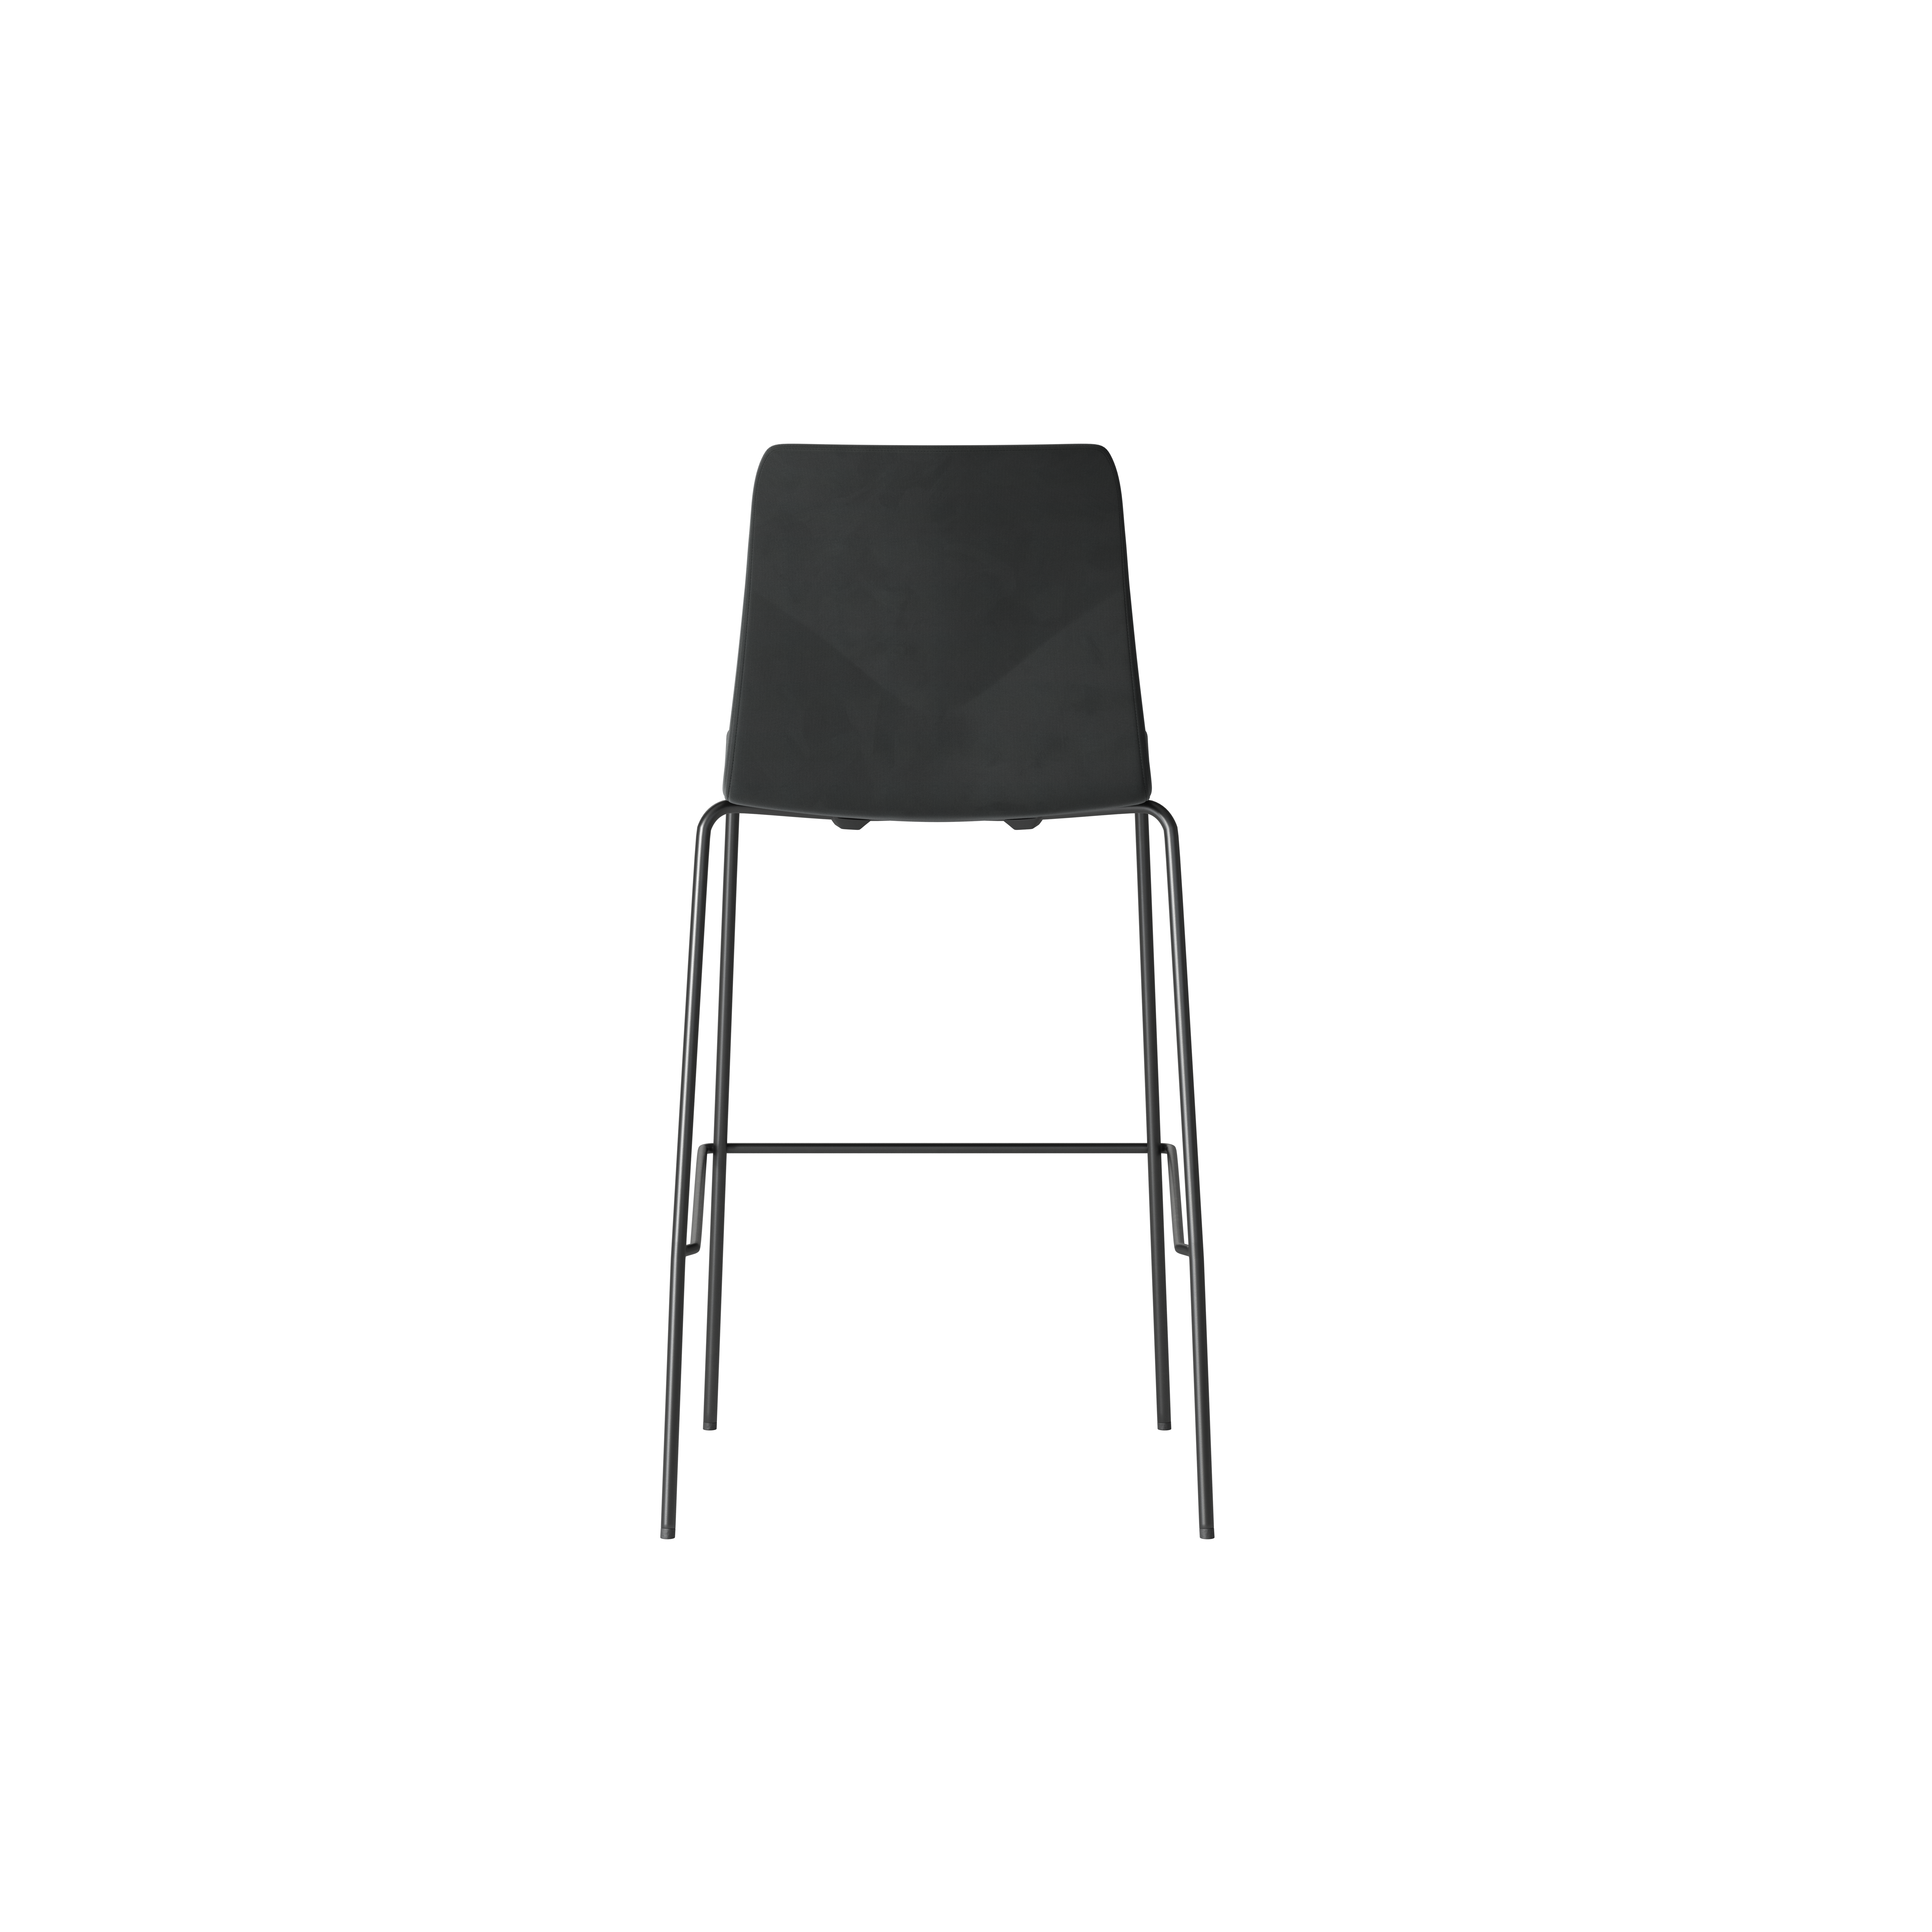 OCEE_FOUR – Chairs – FourCast 2 High Four – Plastic shell - Fully Upholstered - Packshot Image 4